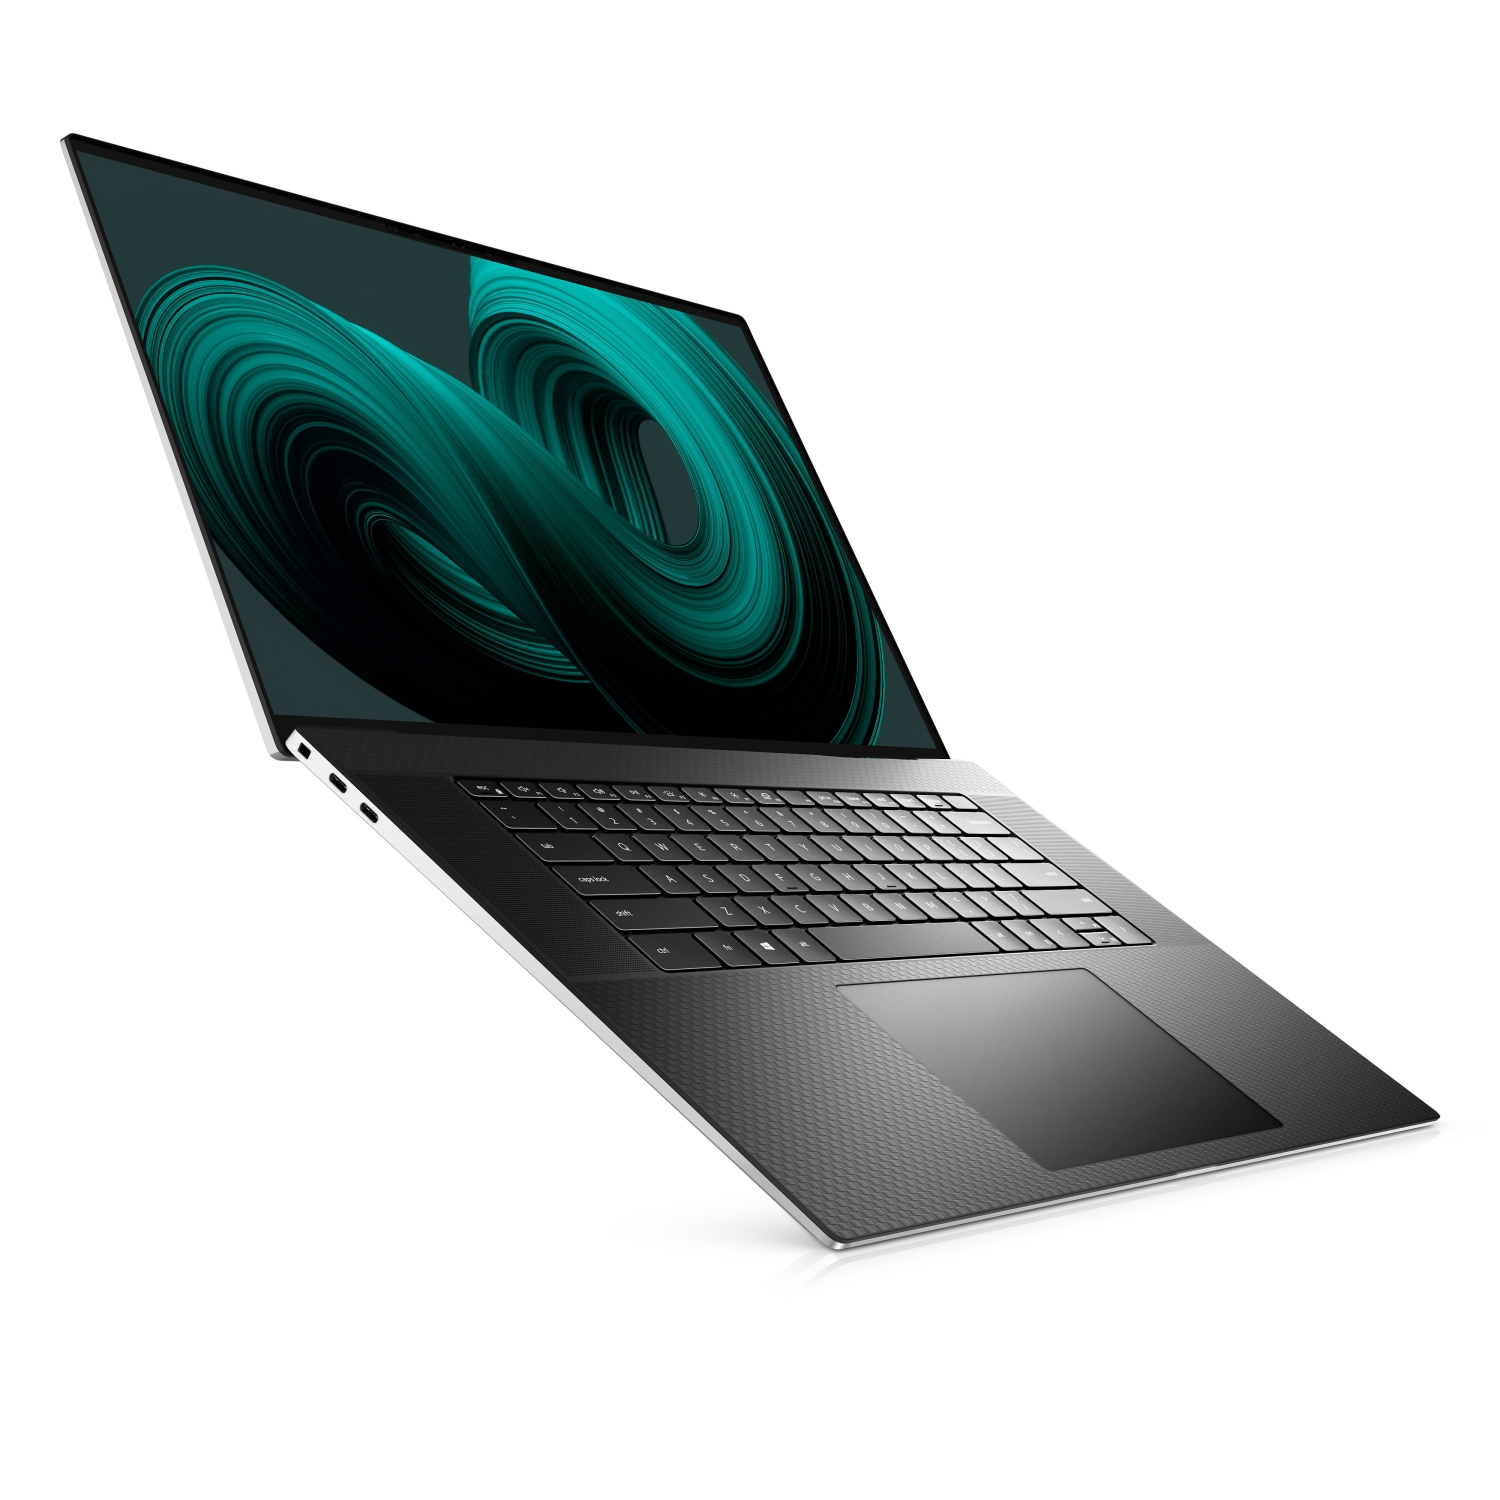 Refurbished (Excellent) - Dell XPS 17 9710 Laptop (2021) | 17" 4K Touch | Core i7 - 2TB SSD - 64GB RAM - RTX 3050 | 8 Cores @ 4.6 GHz - 11th Gen CPU Certified Refurbished